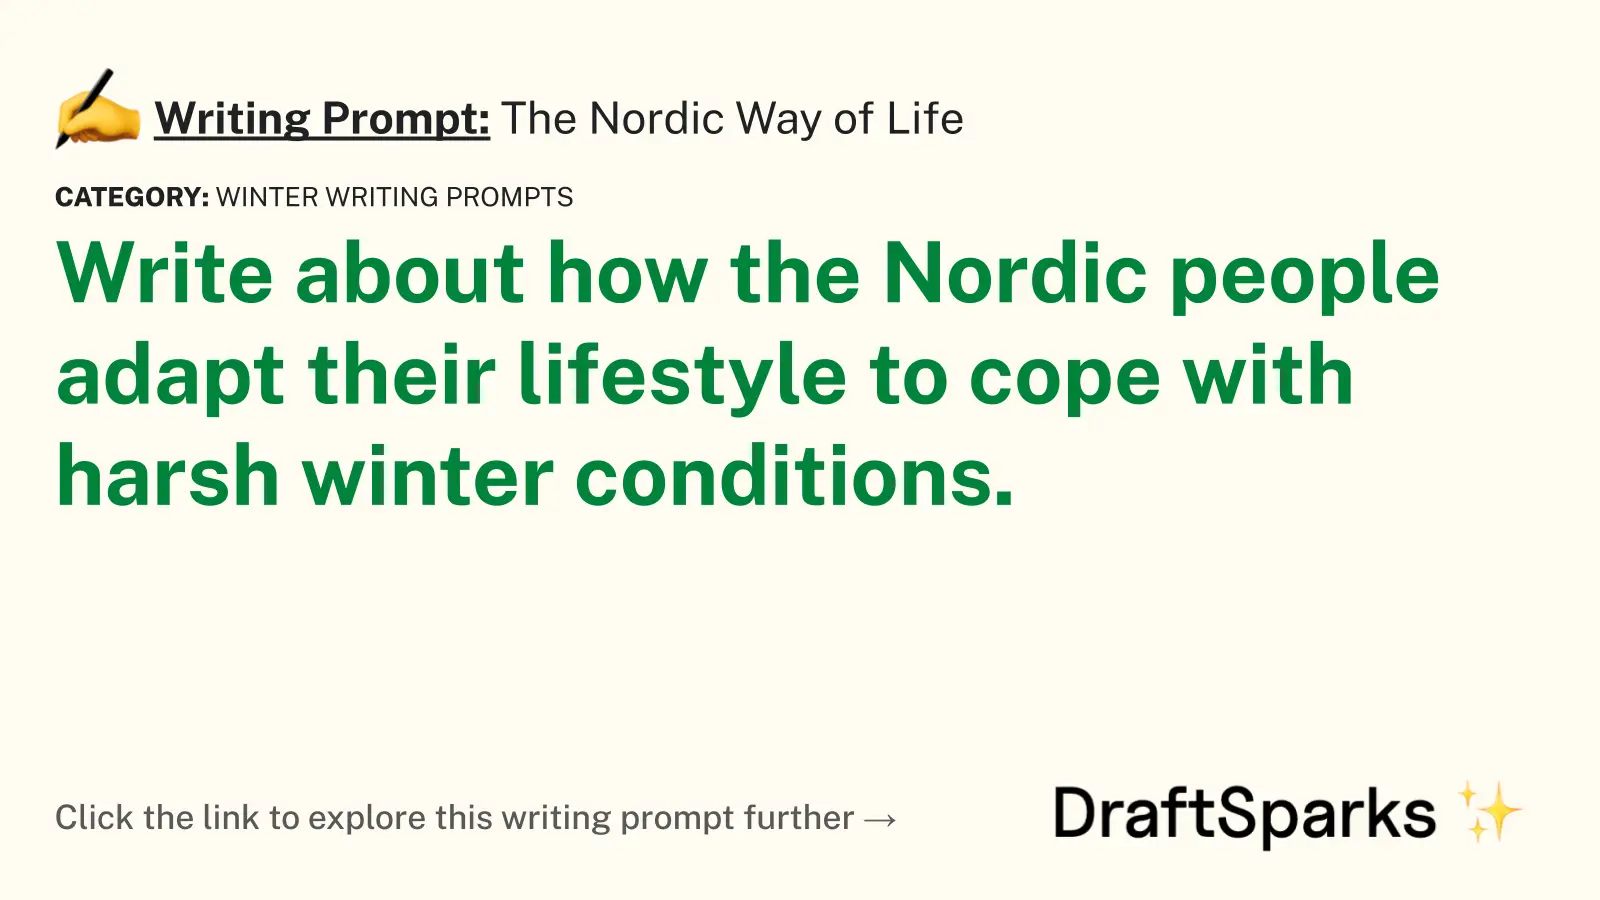 The Nordic Way of Life